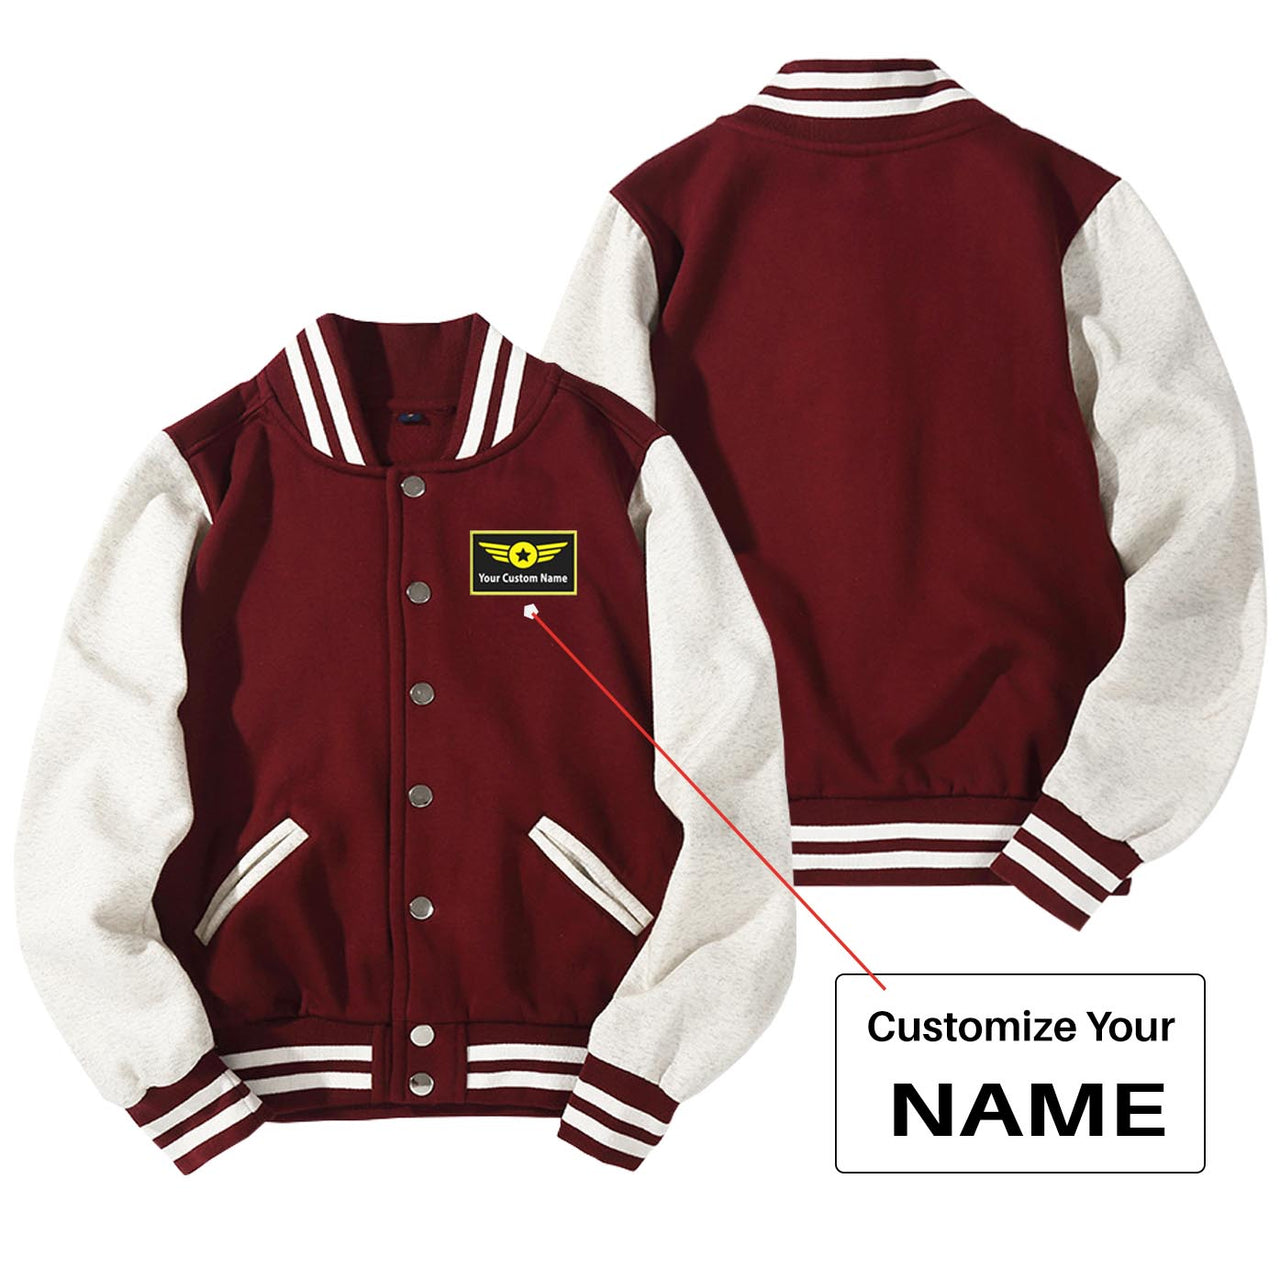 Custom Name with "Special Badge" Designed Baseball Style Jackets